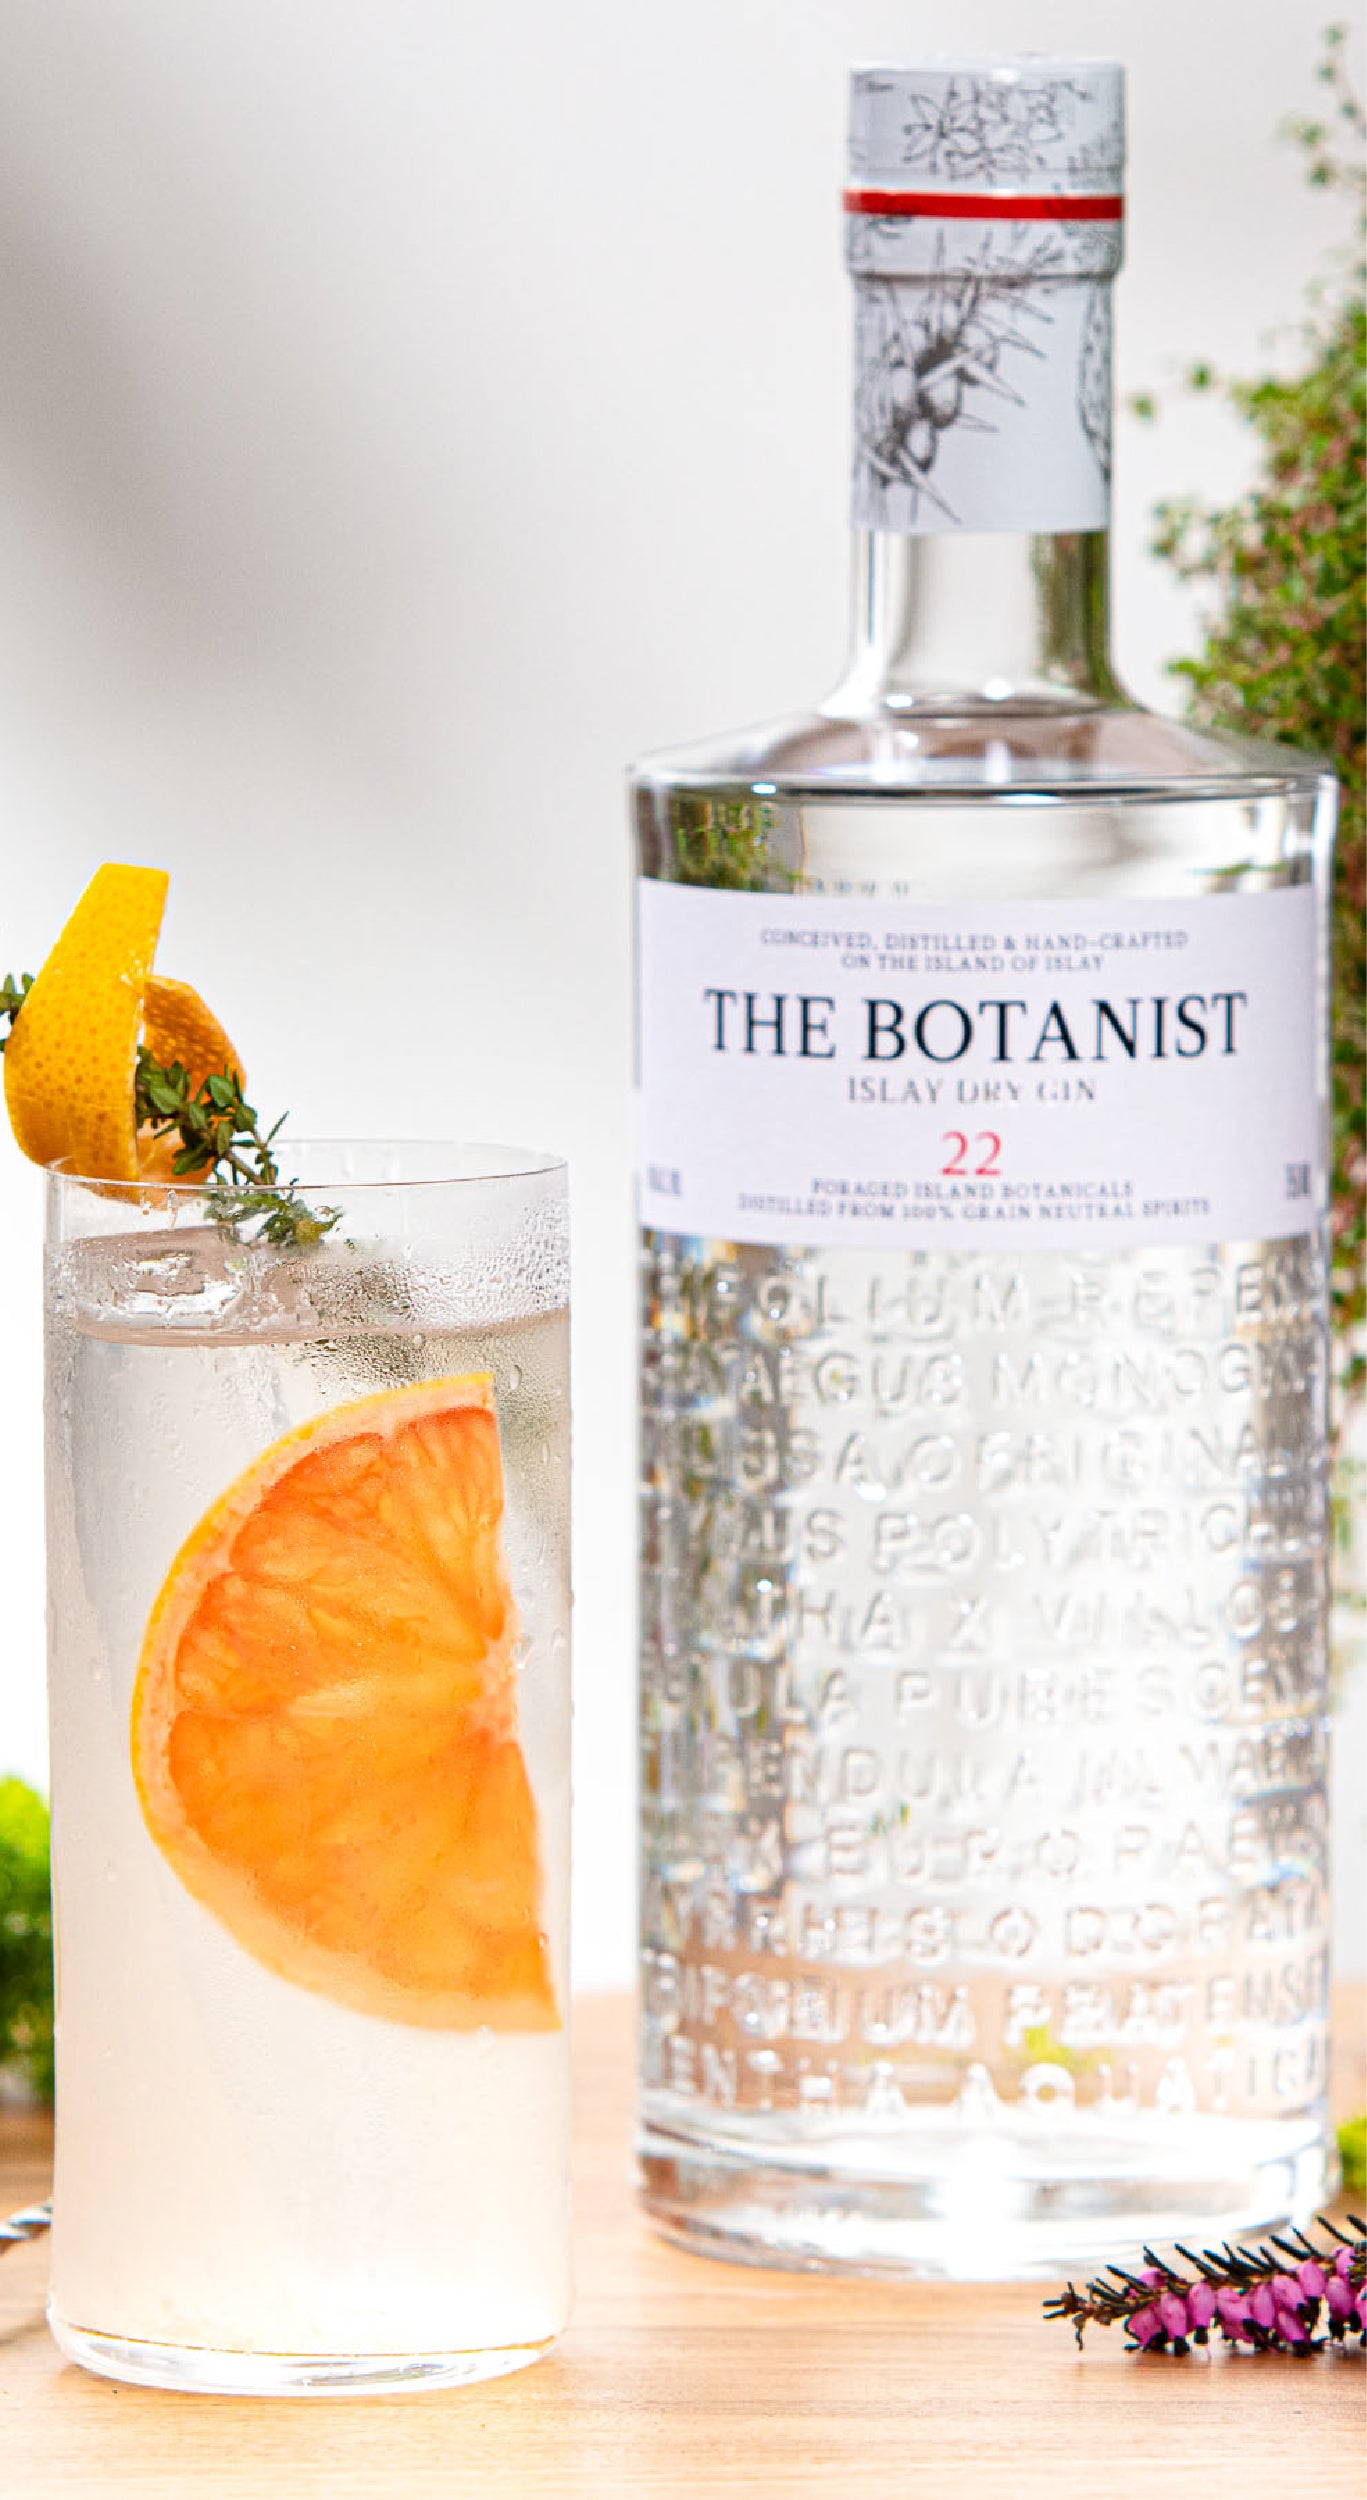 A lifestyle photo of a Botanist bottle close to a glass of cocktail with an orange slice